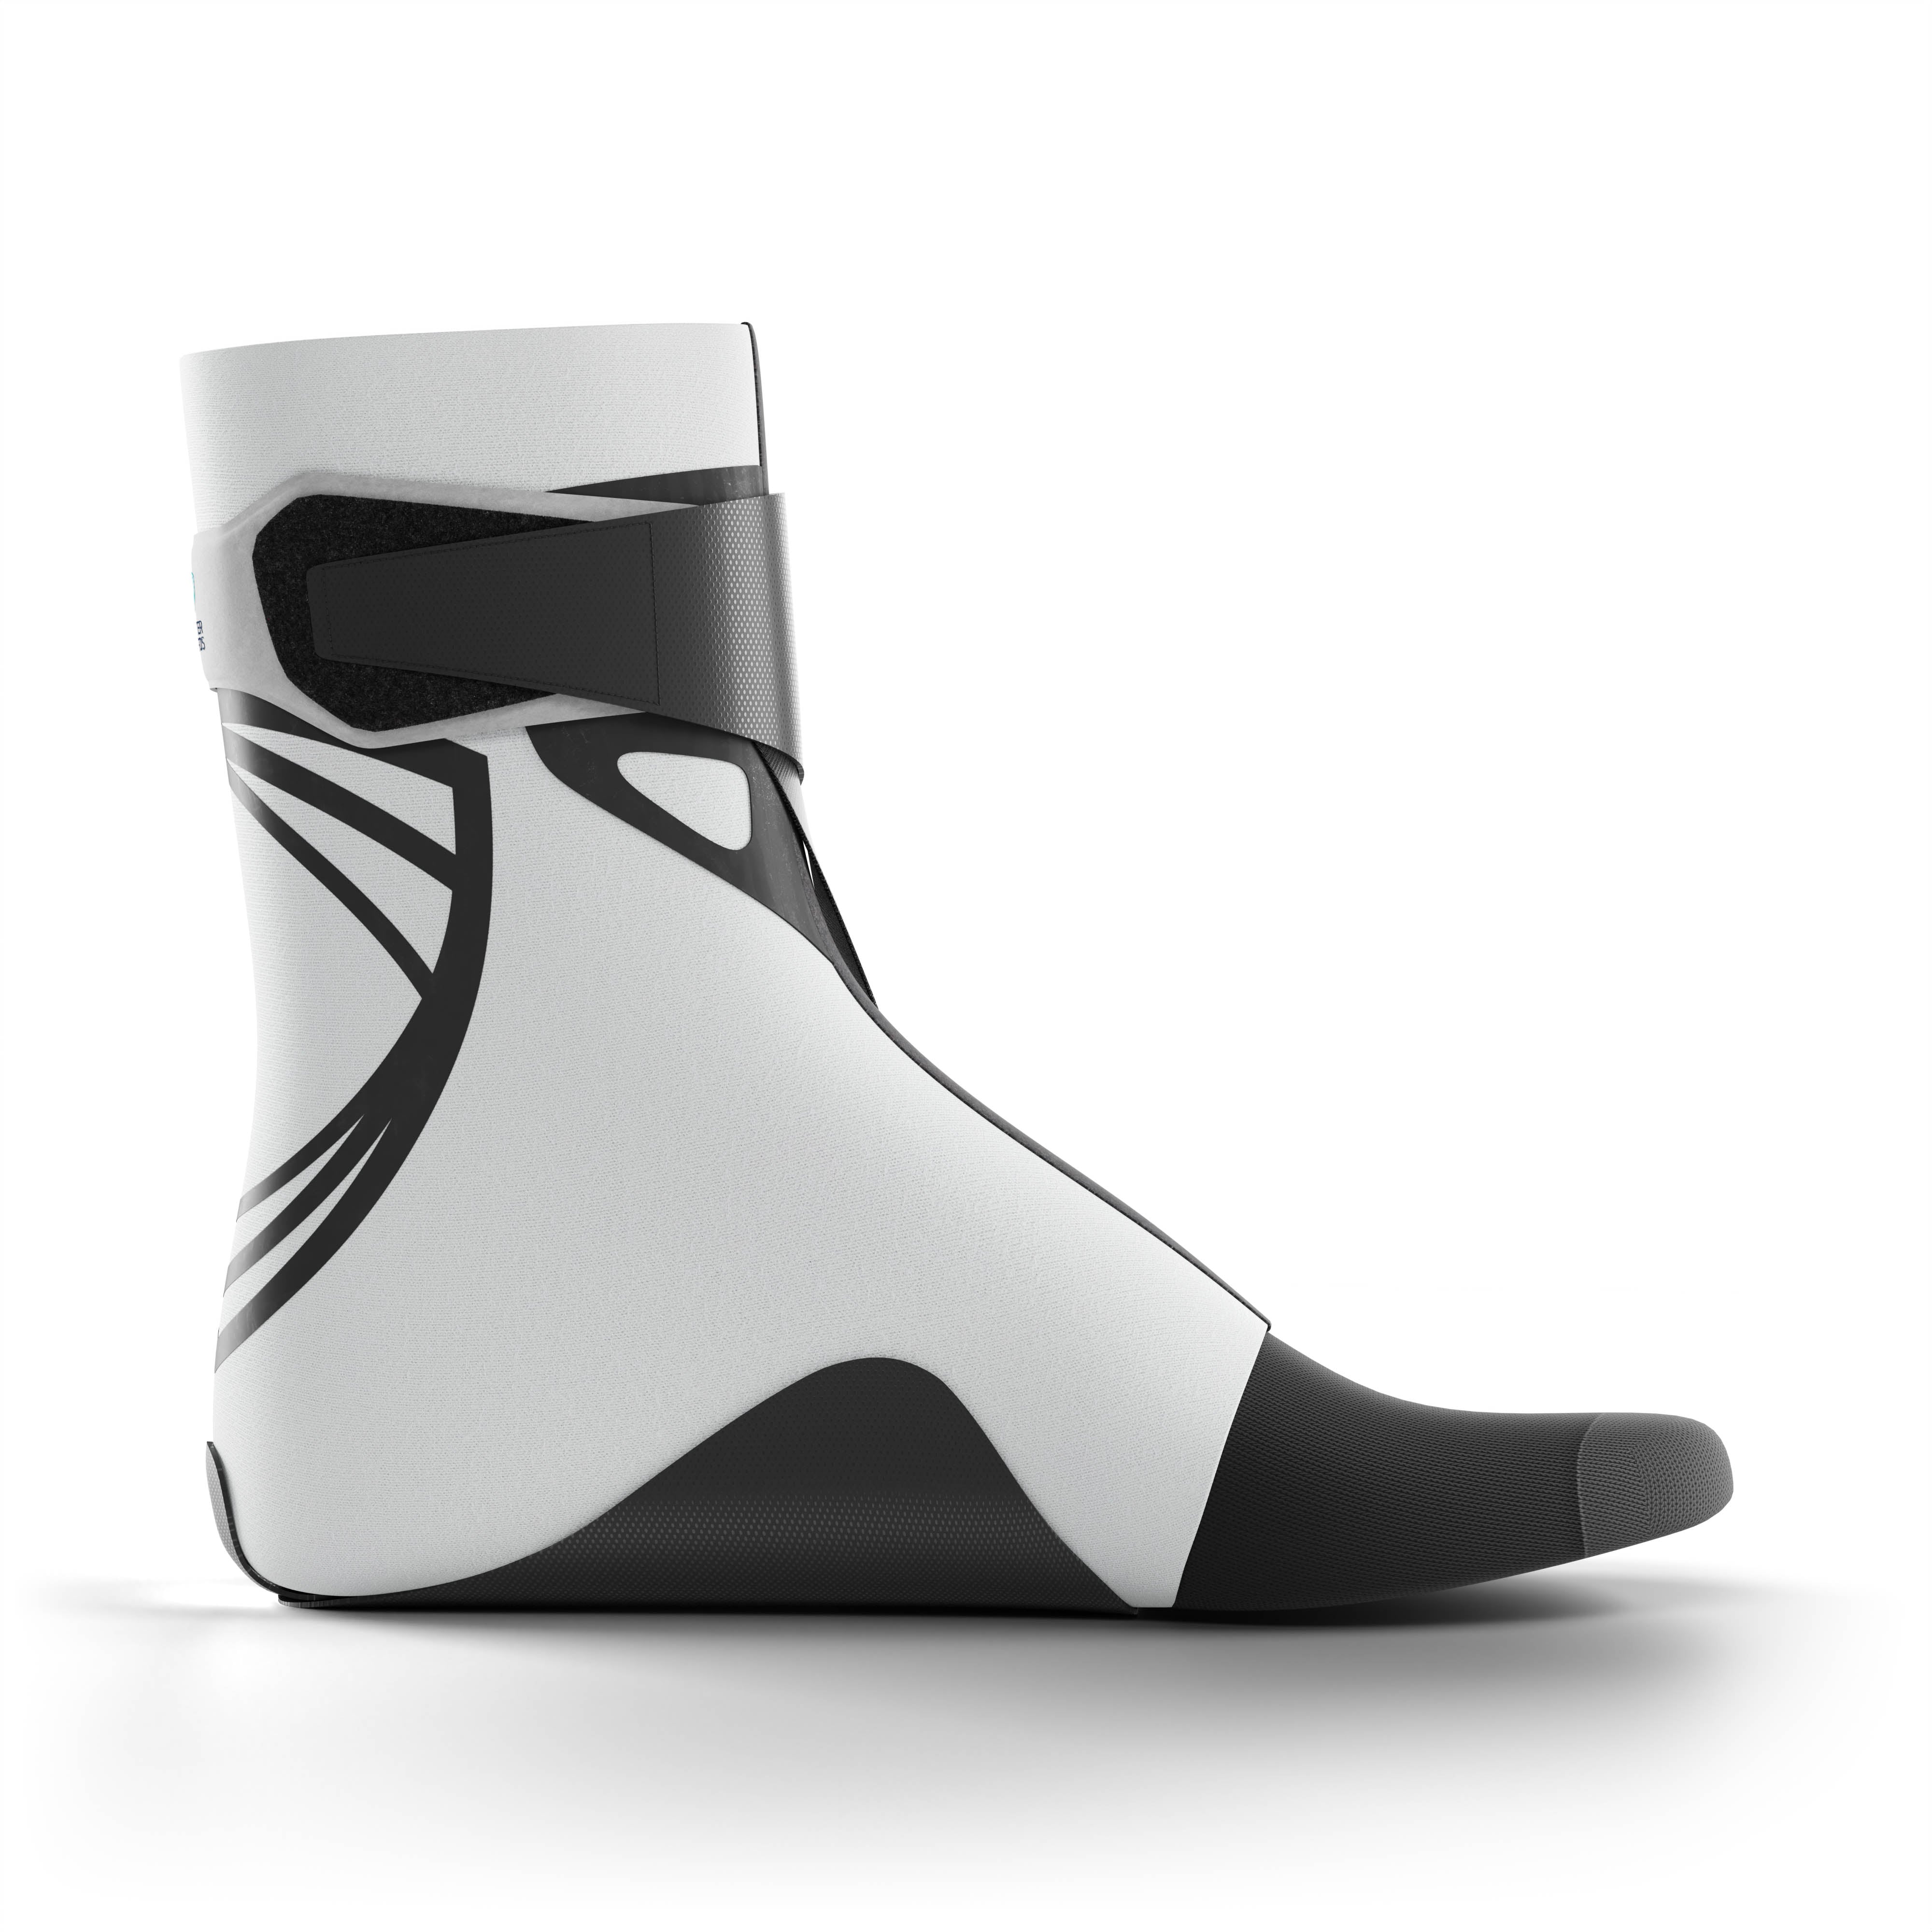 The best ankle brace for all sports ankle support. Medial side view. #color_gray